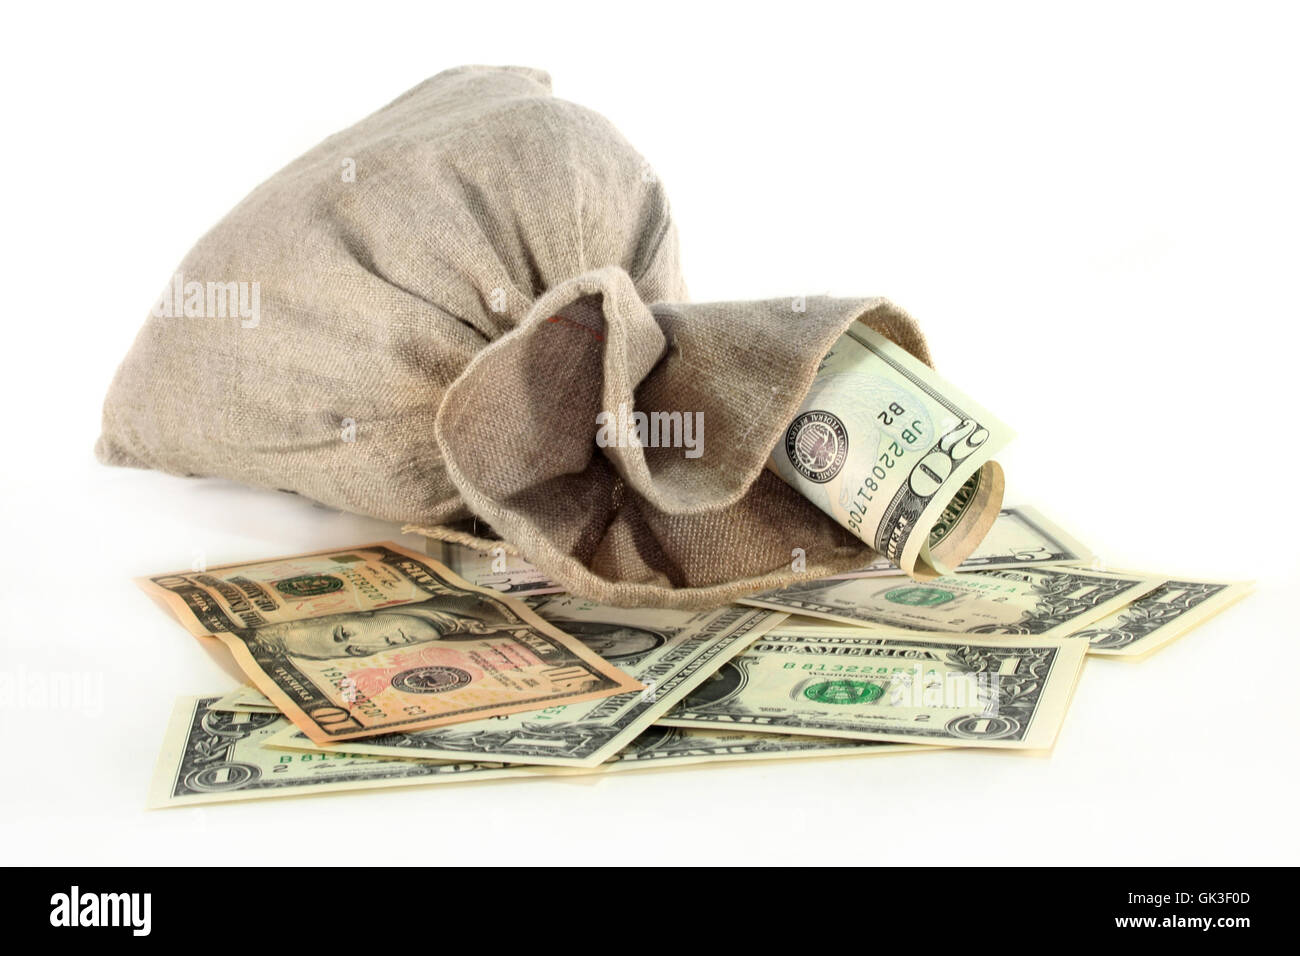 currency purse wallet Stock Photo